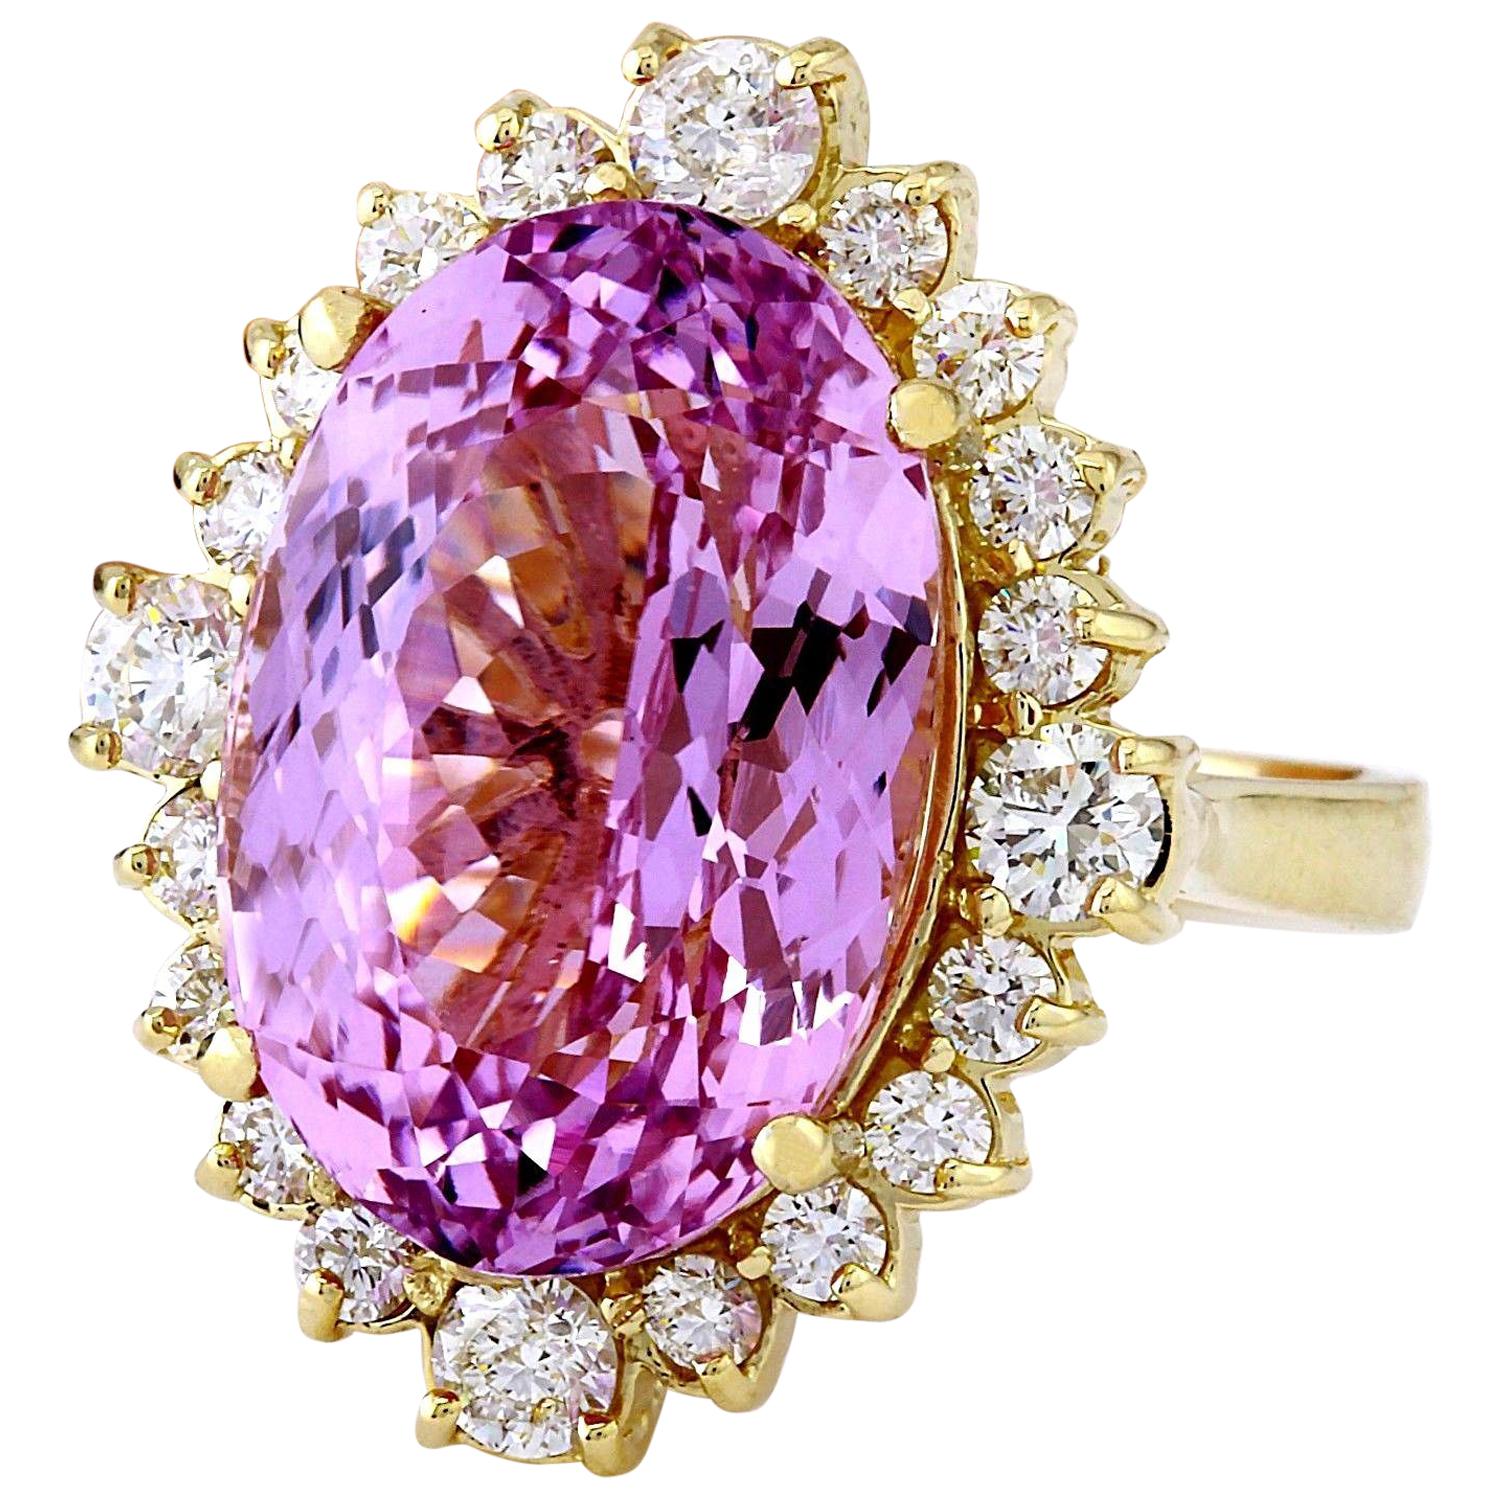 Discover luxury with this 14K Solid Yellow Gold Diamond Ring featuring a mesmerizing 14.90 Carat Natural Kunzite. Crafted from exquisite 14K Yellow Gold, this ring showcases a stunning oval-shaped Kunzite weighing 13.80 Carats, with dimensions of